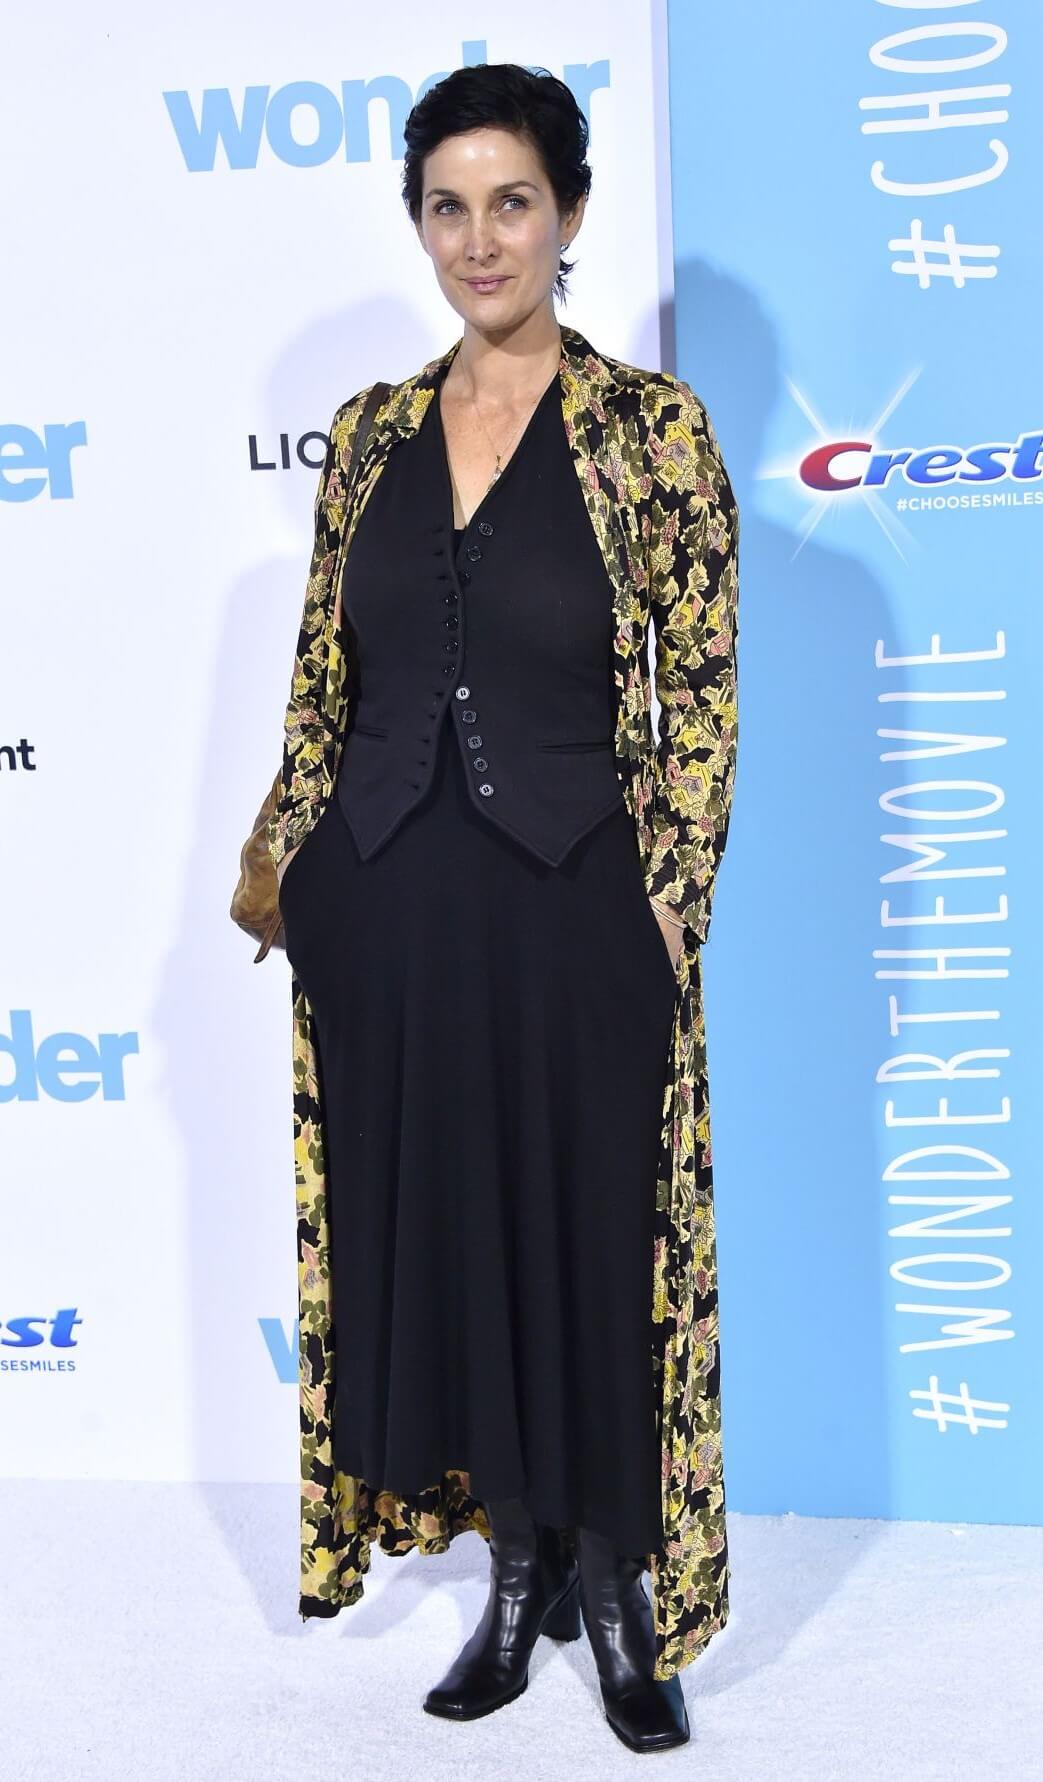 Carrie-Anne Moss  In Yellow Printed Long Shrug Under Black Top With Long Skirt Outfit At“Wonder” Premiere in Westwood